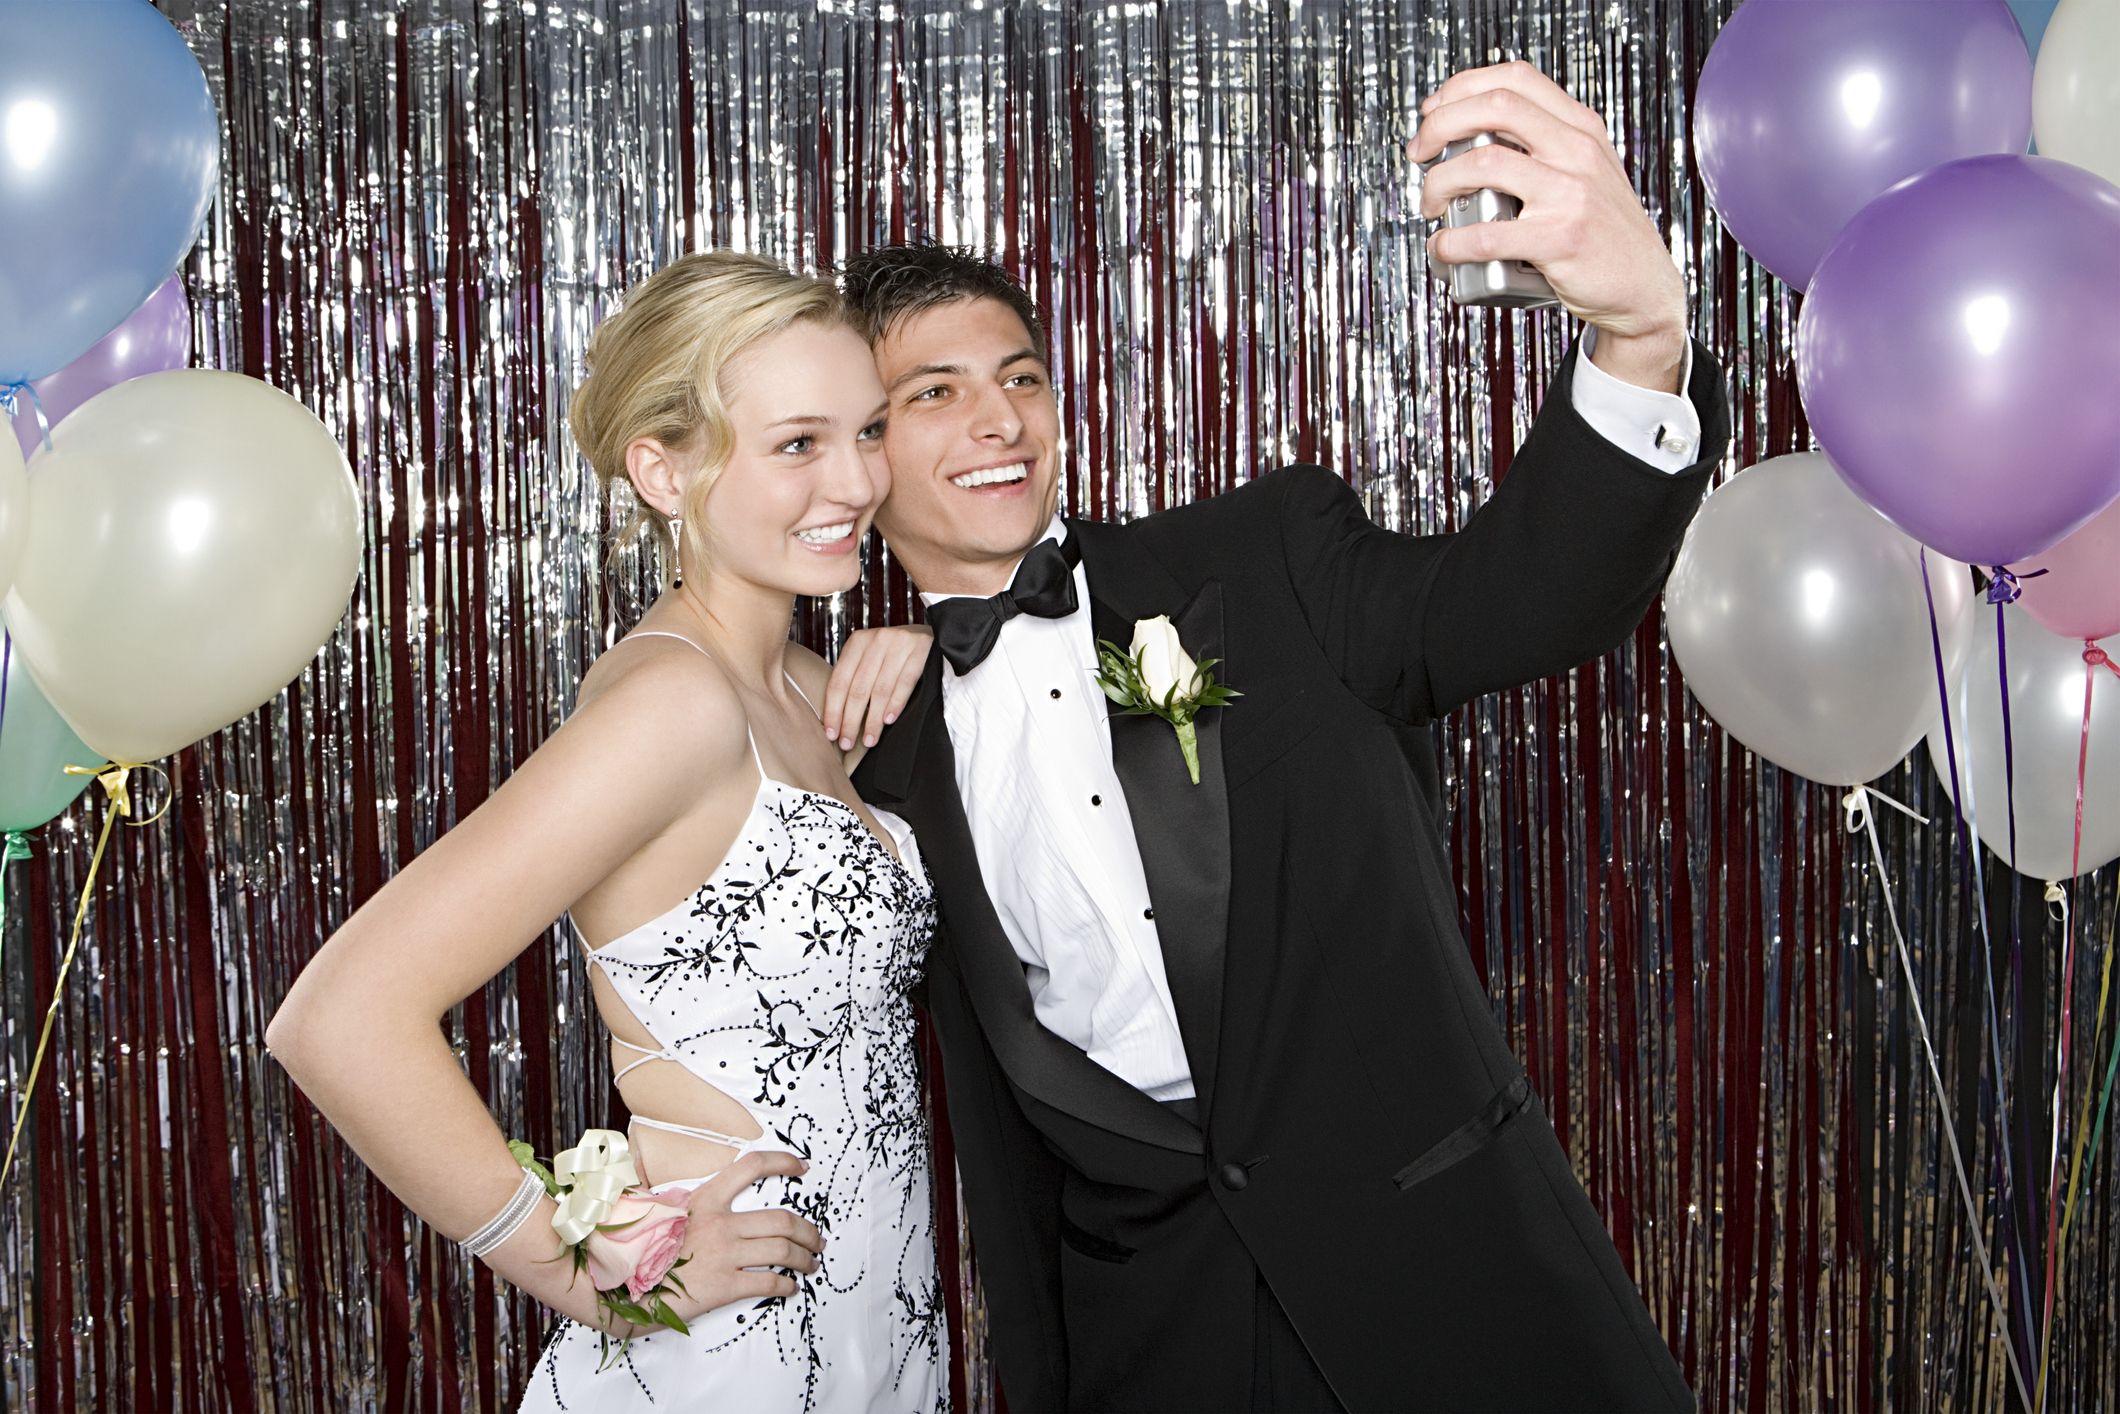 43 Prom Instagram Captions 2023 - Funny and Short Prom Captions